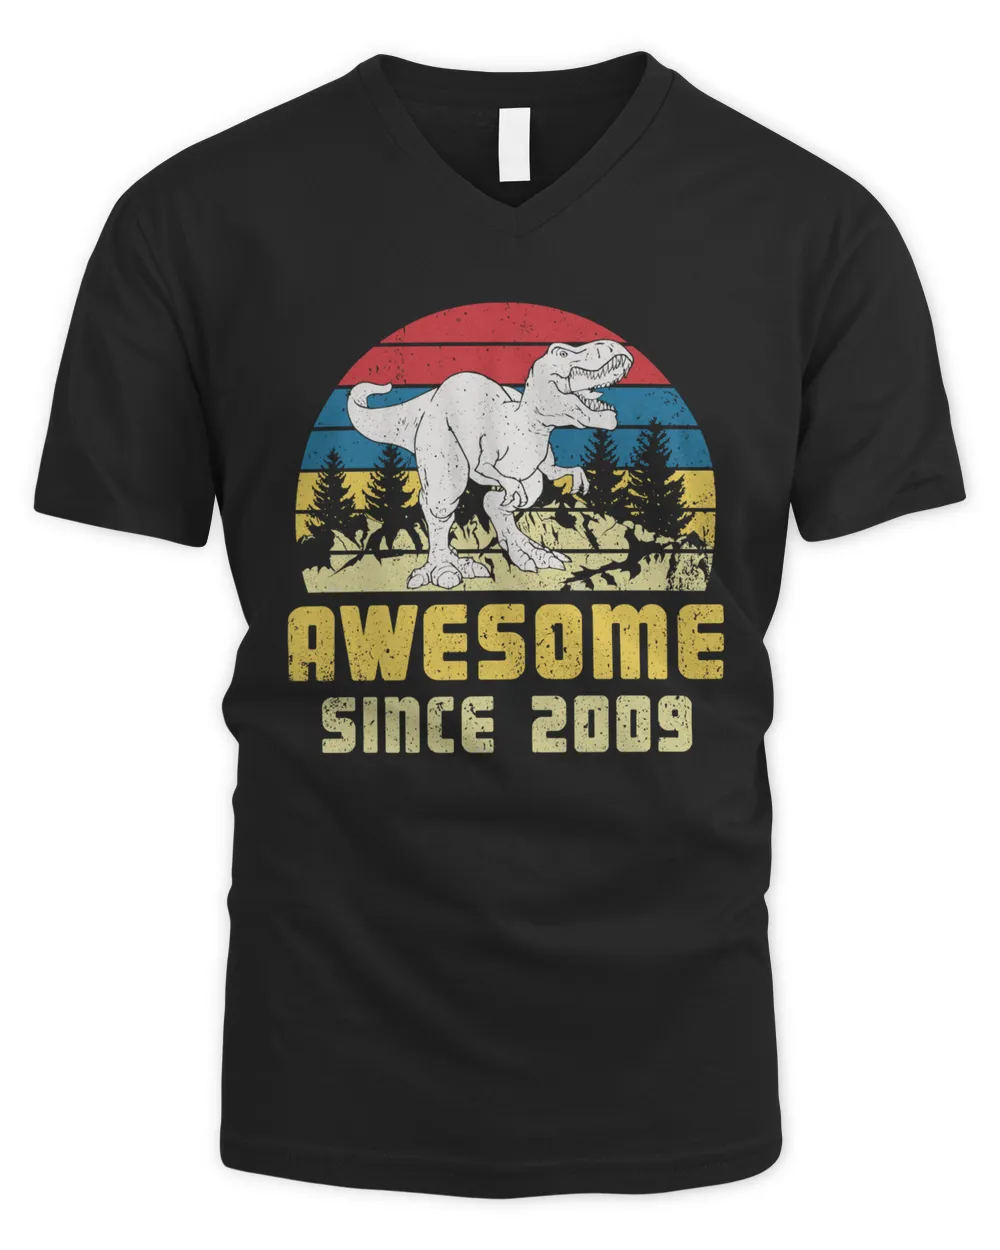 Awesome Since 2009, Born In 2009, Vintage 2009, Birthday Dinosaur, Birthday Gift For Him, Birthday Gift For Her